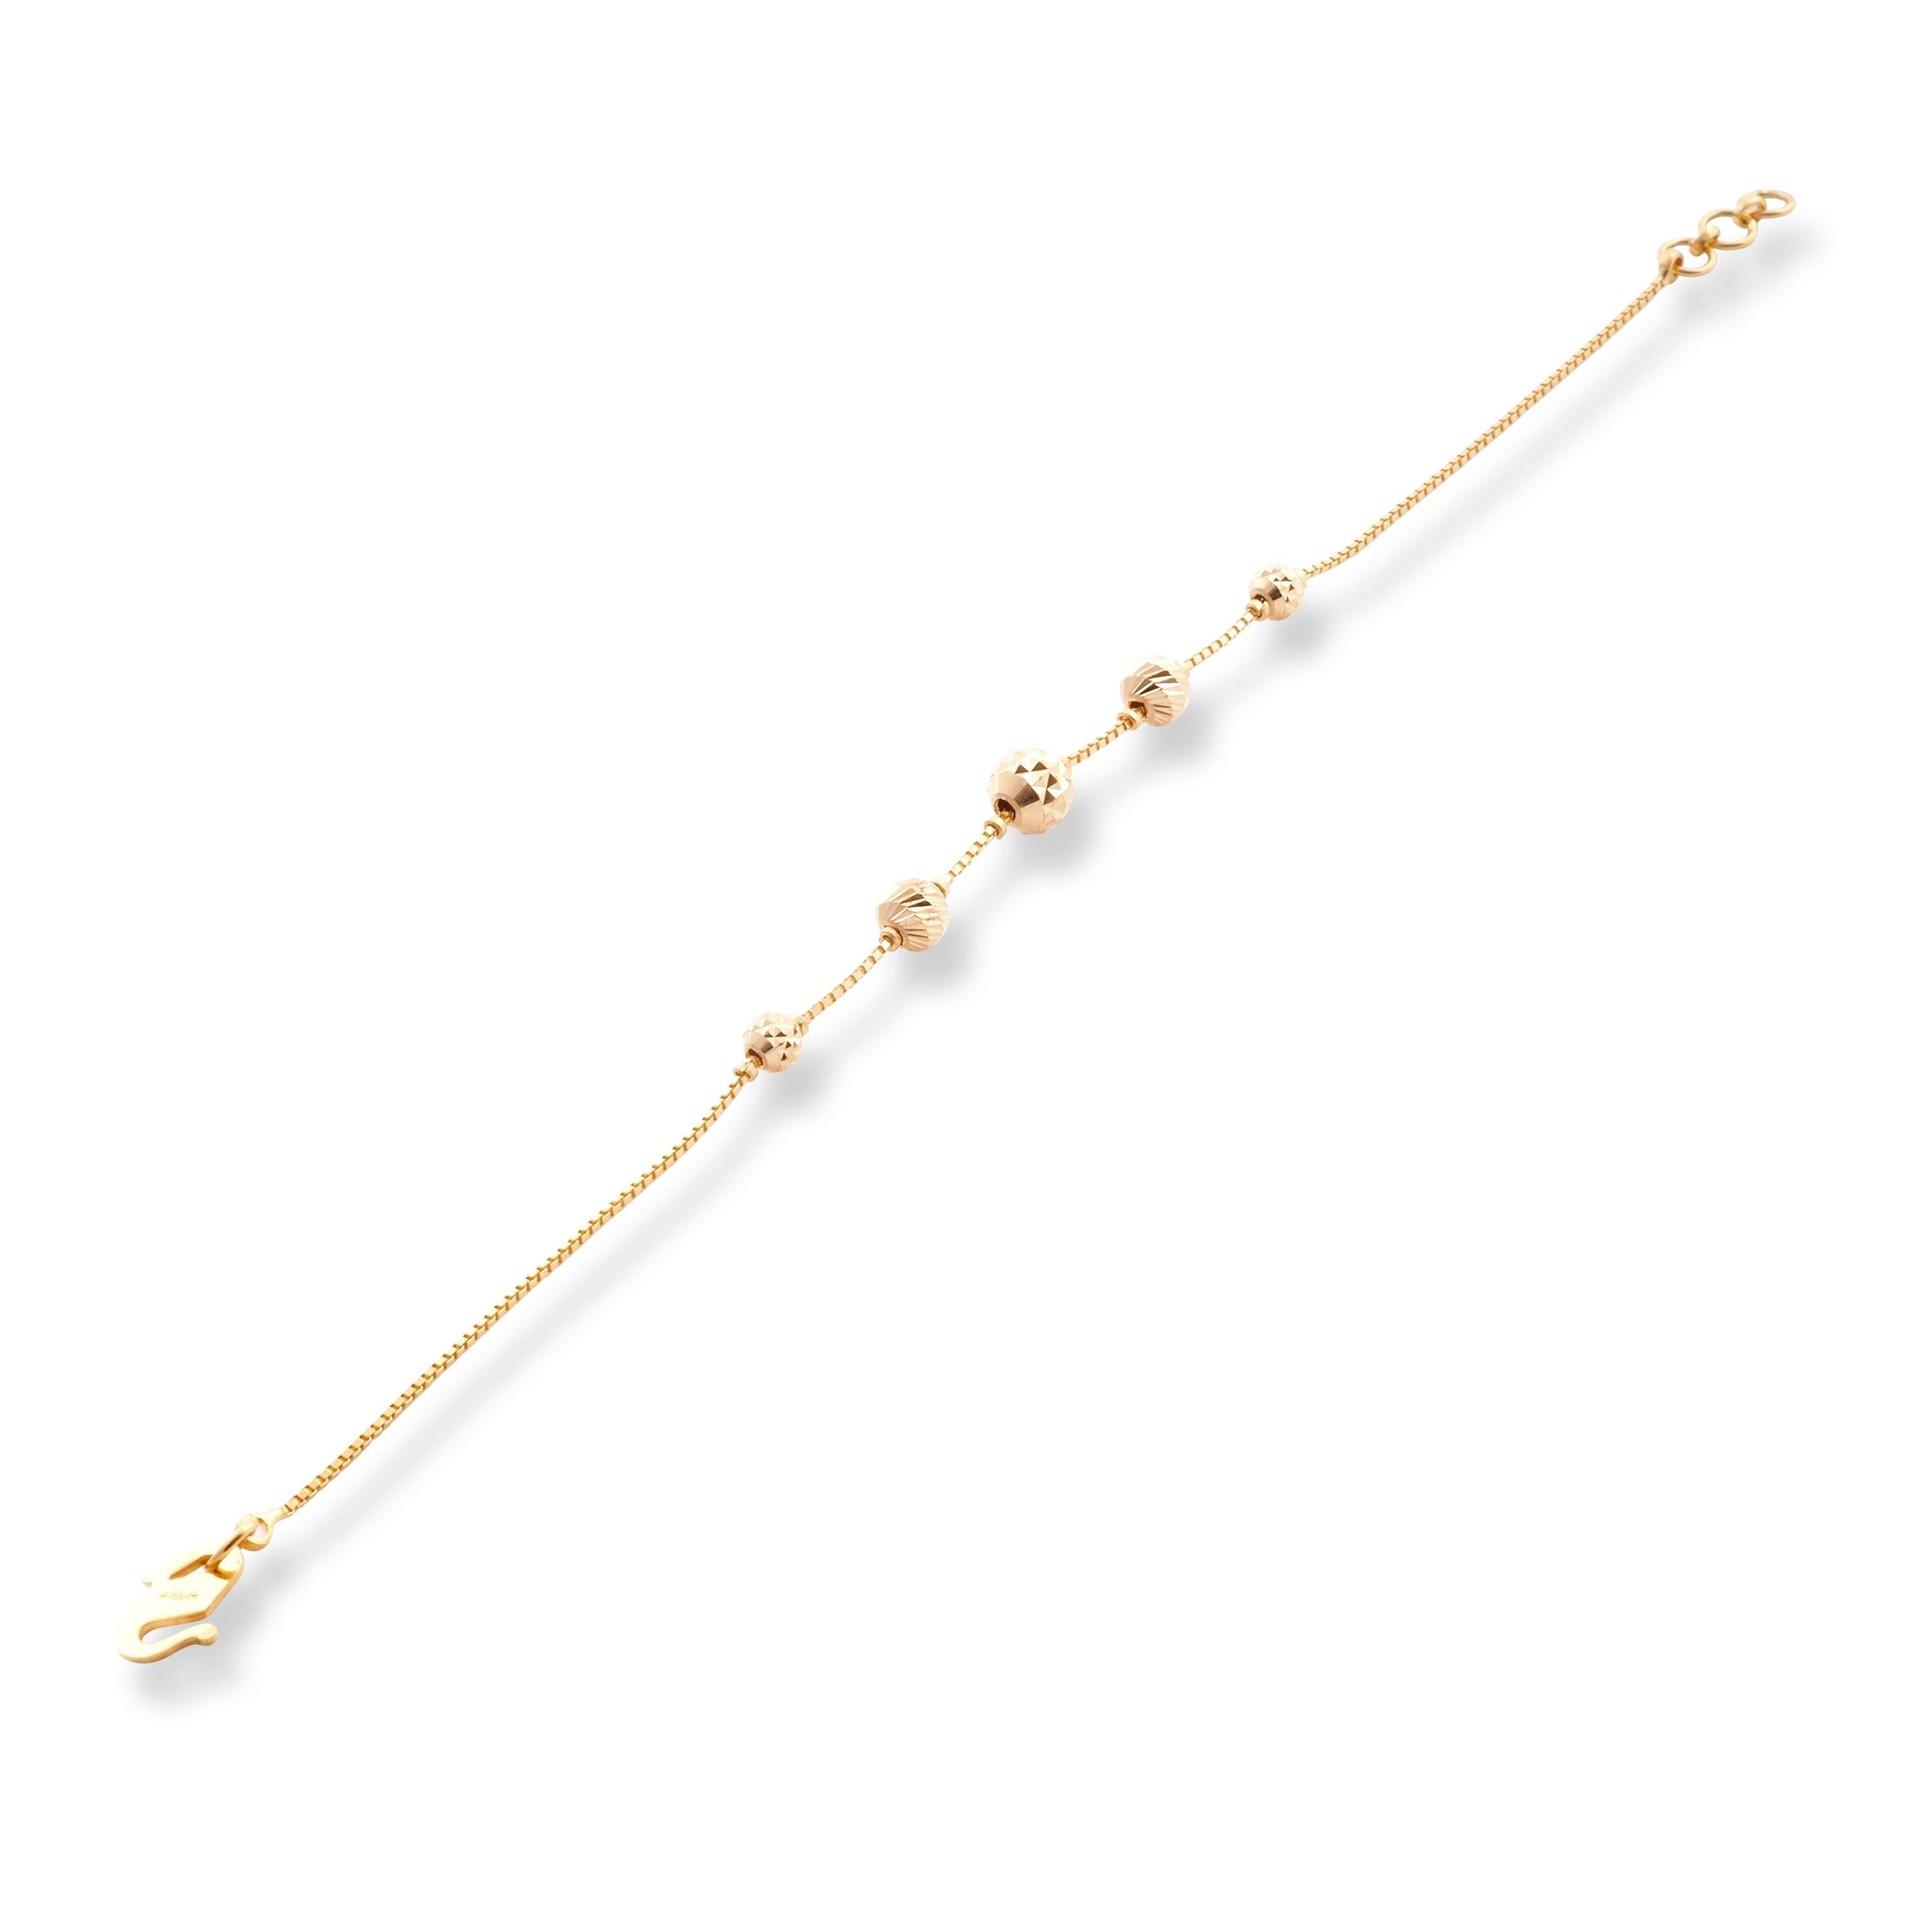 22ct Yellow Gold Bracelet in Rhodium Plating Beads with ''S'' Clasp LBR-8509 - Minar Jewellers